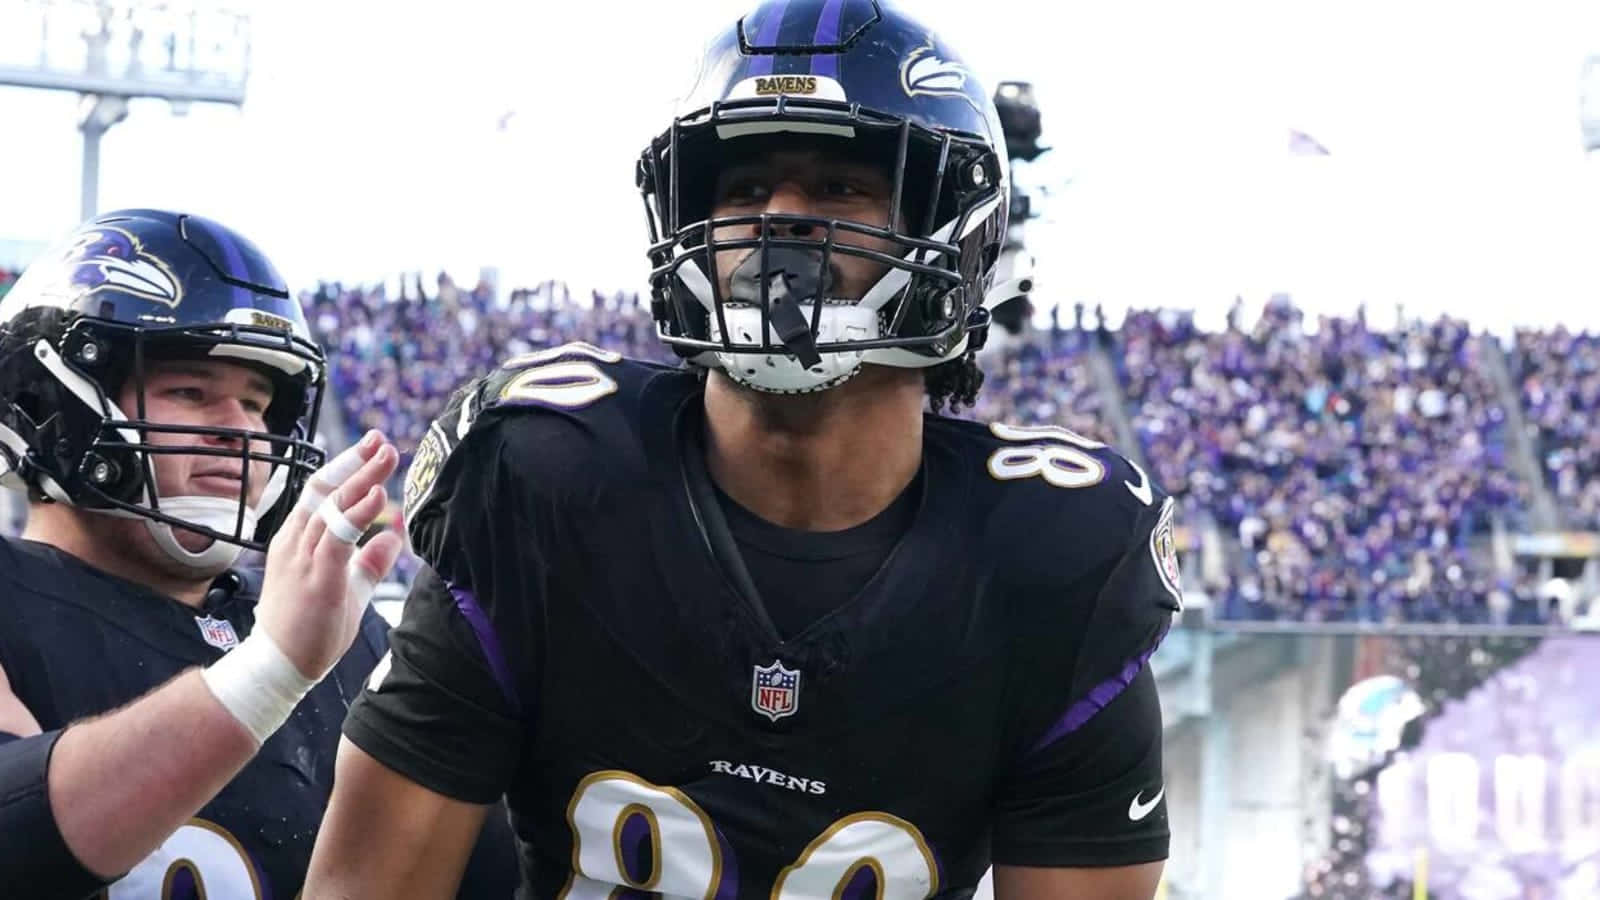 Ravens Player Isaiah Likely Game Day Wallpaper